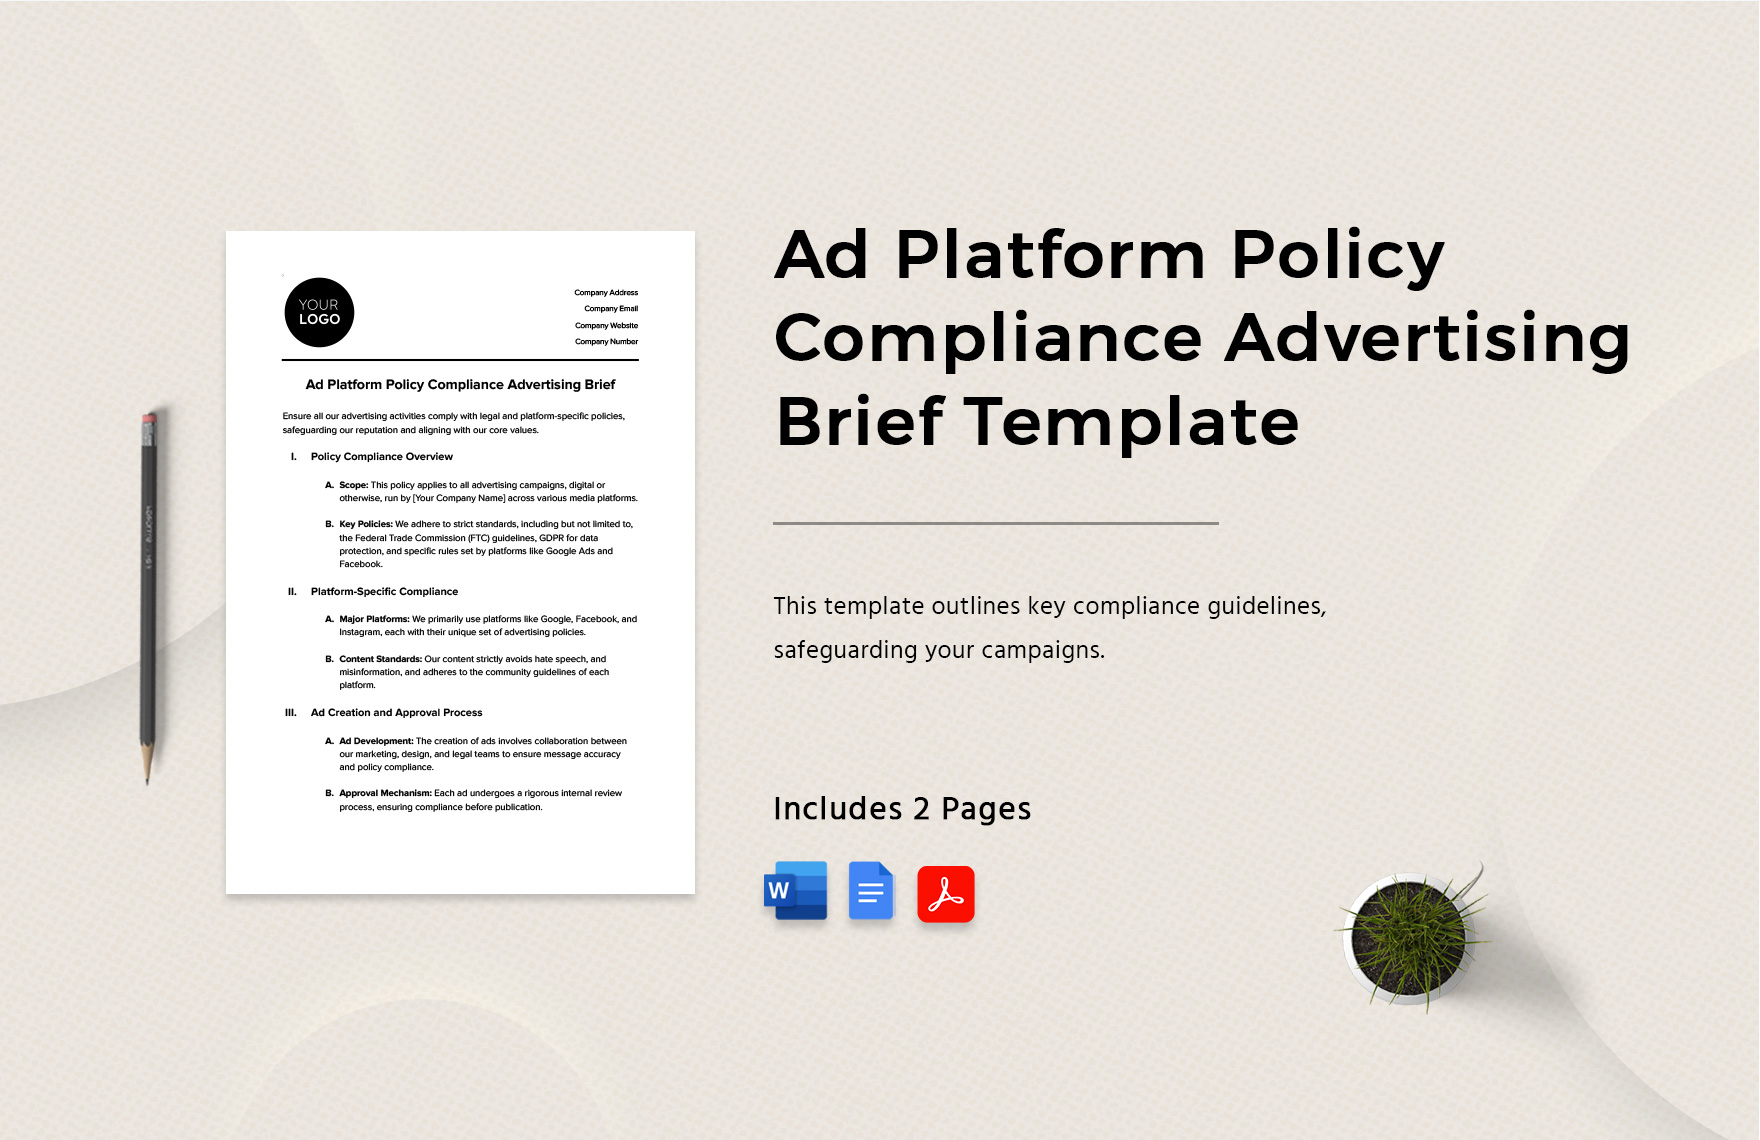 Ad Platform Policy Compliance Advertising Brief Template in Word, Google Docs, PDF